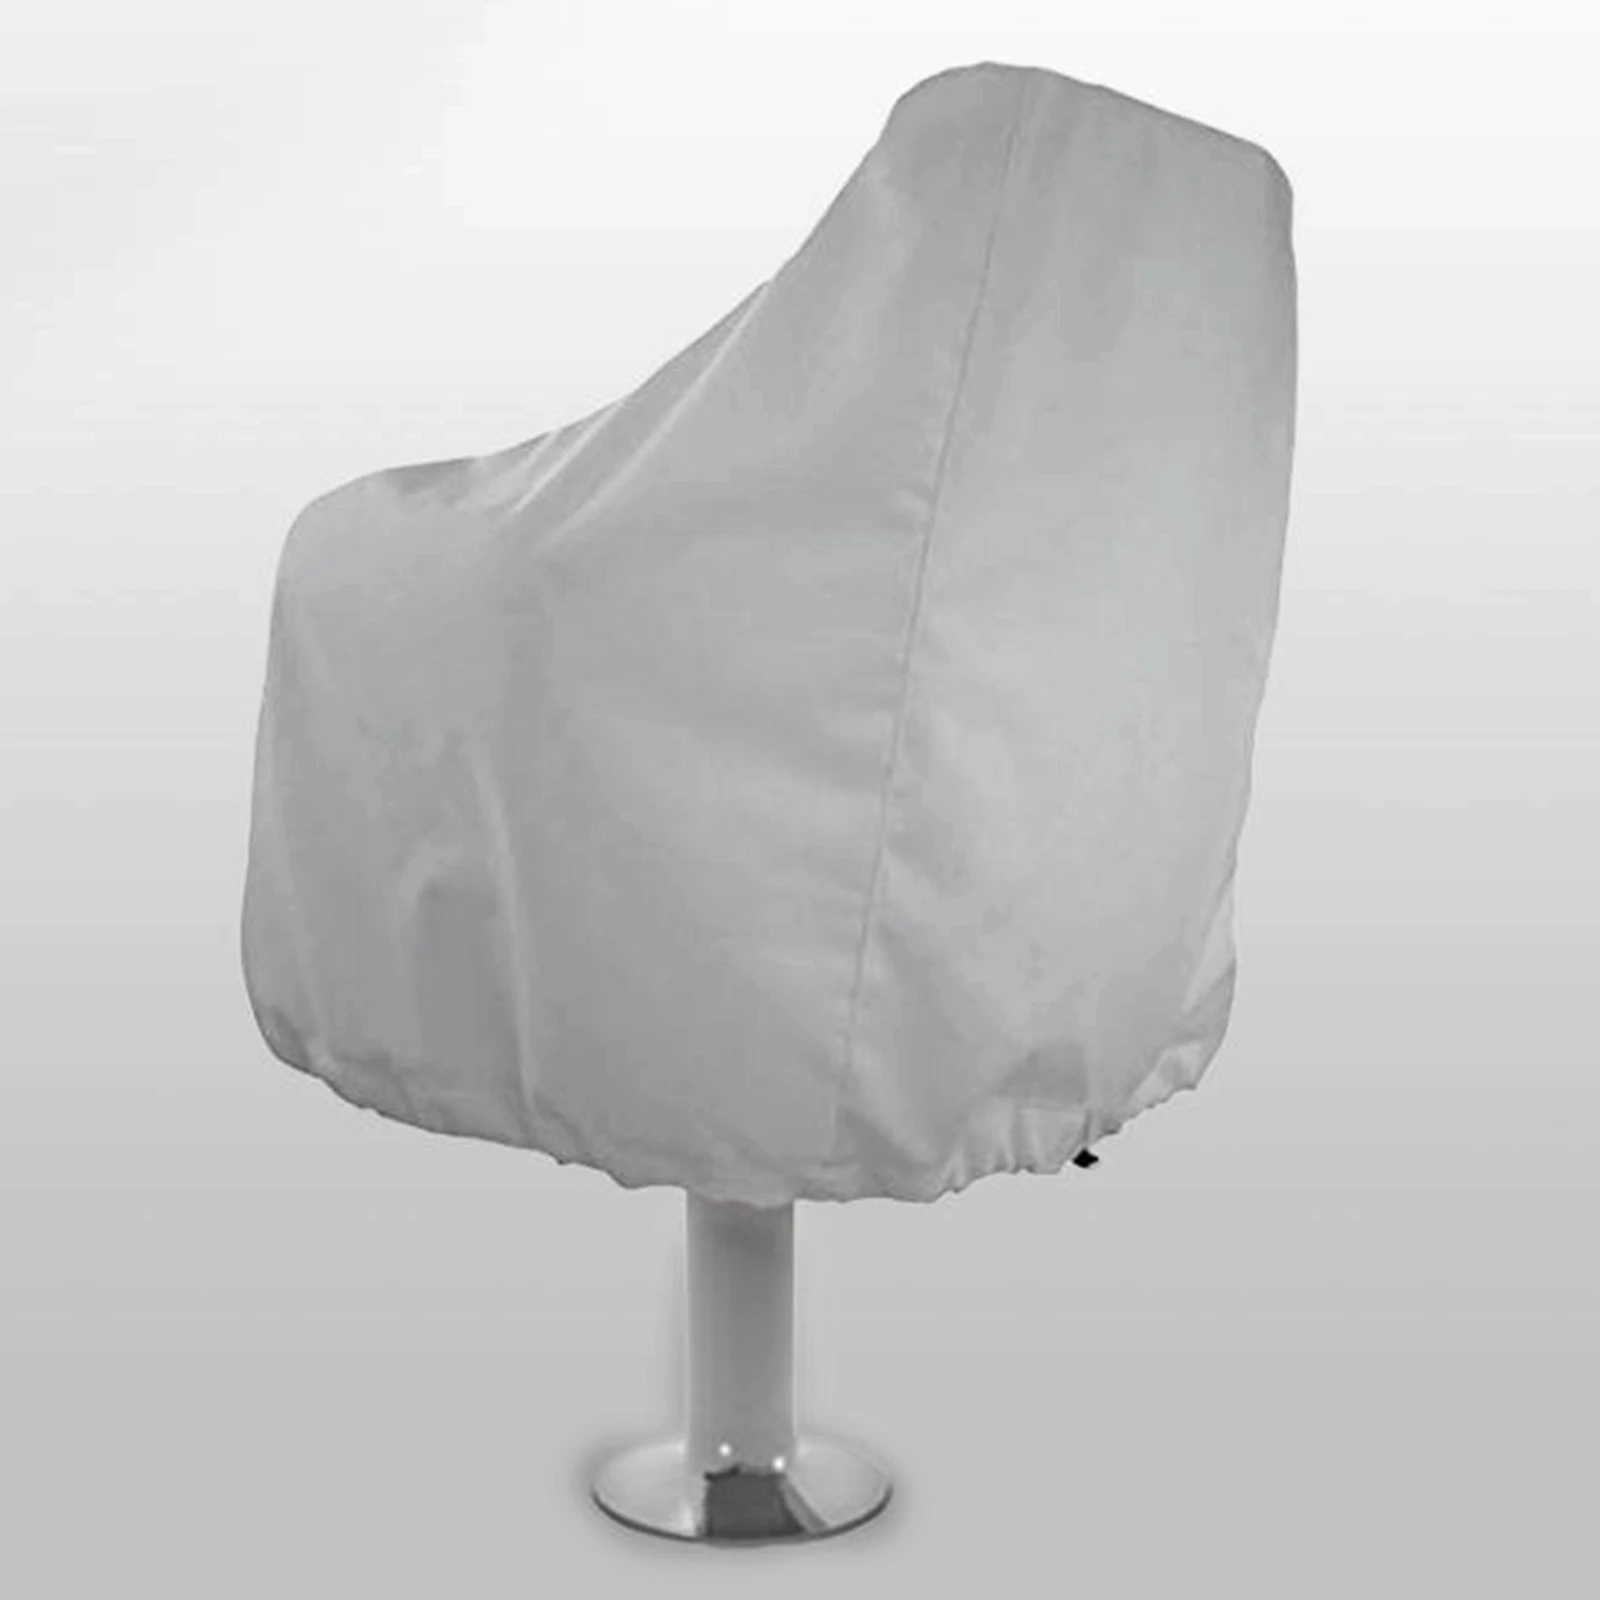 Boat Seat Cover, Folding Waterproof Heavy-Duty Weather Resistant Fabric Protects Fishing Captains Chair